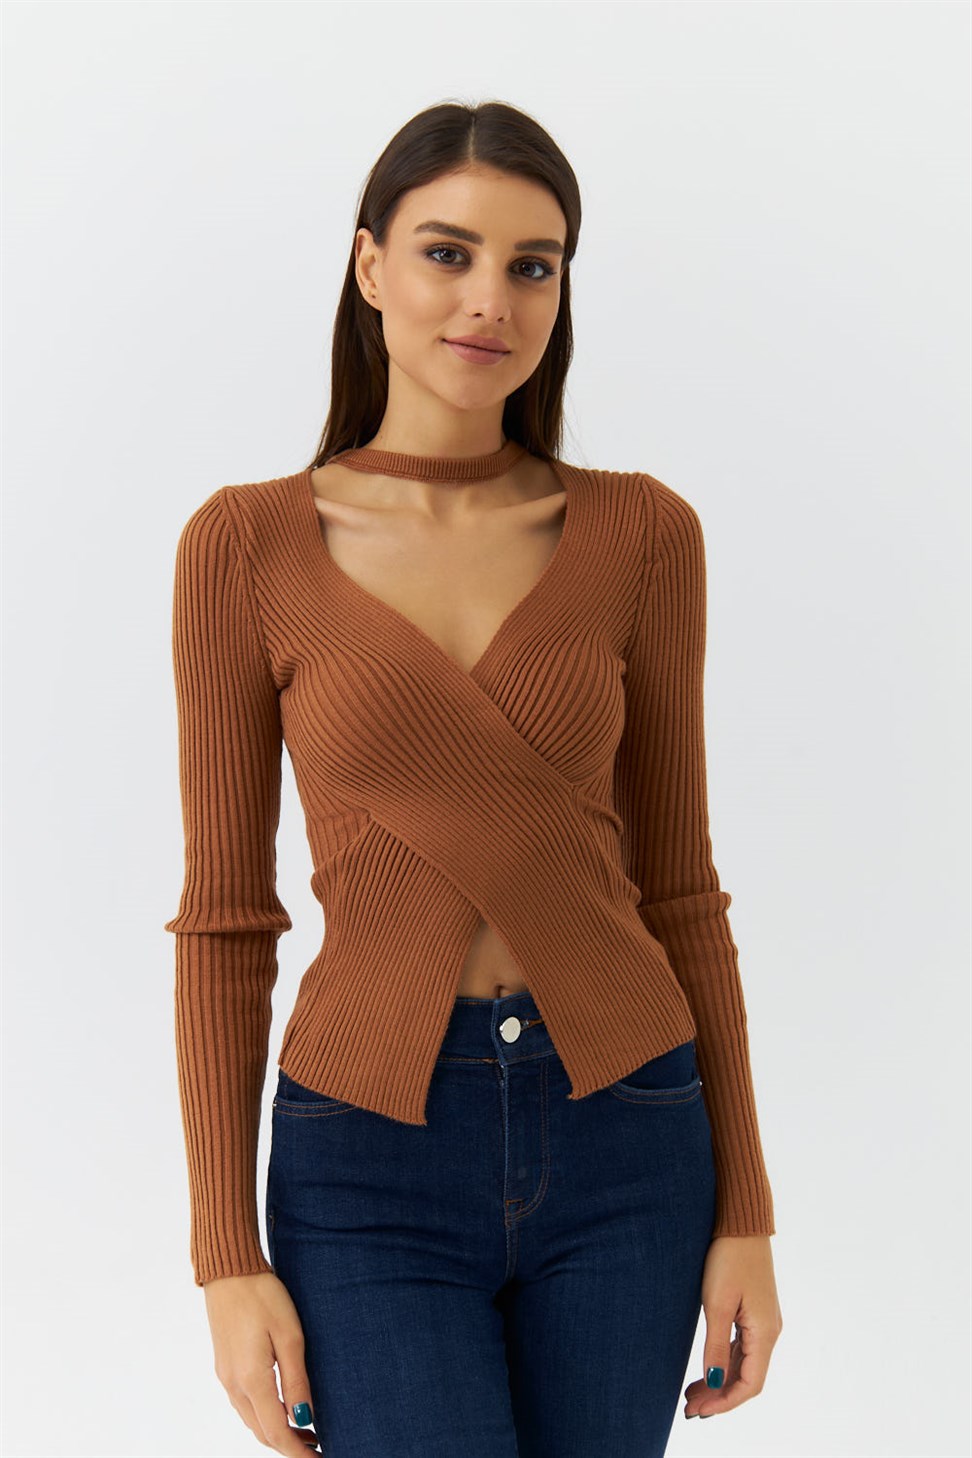 Double Breasted Collar Corduroy Knitwear Light Brown Womens Blouse